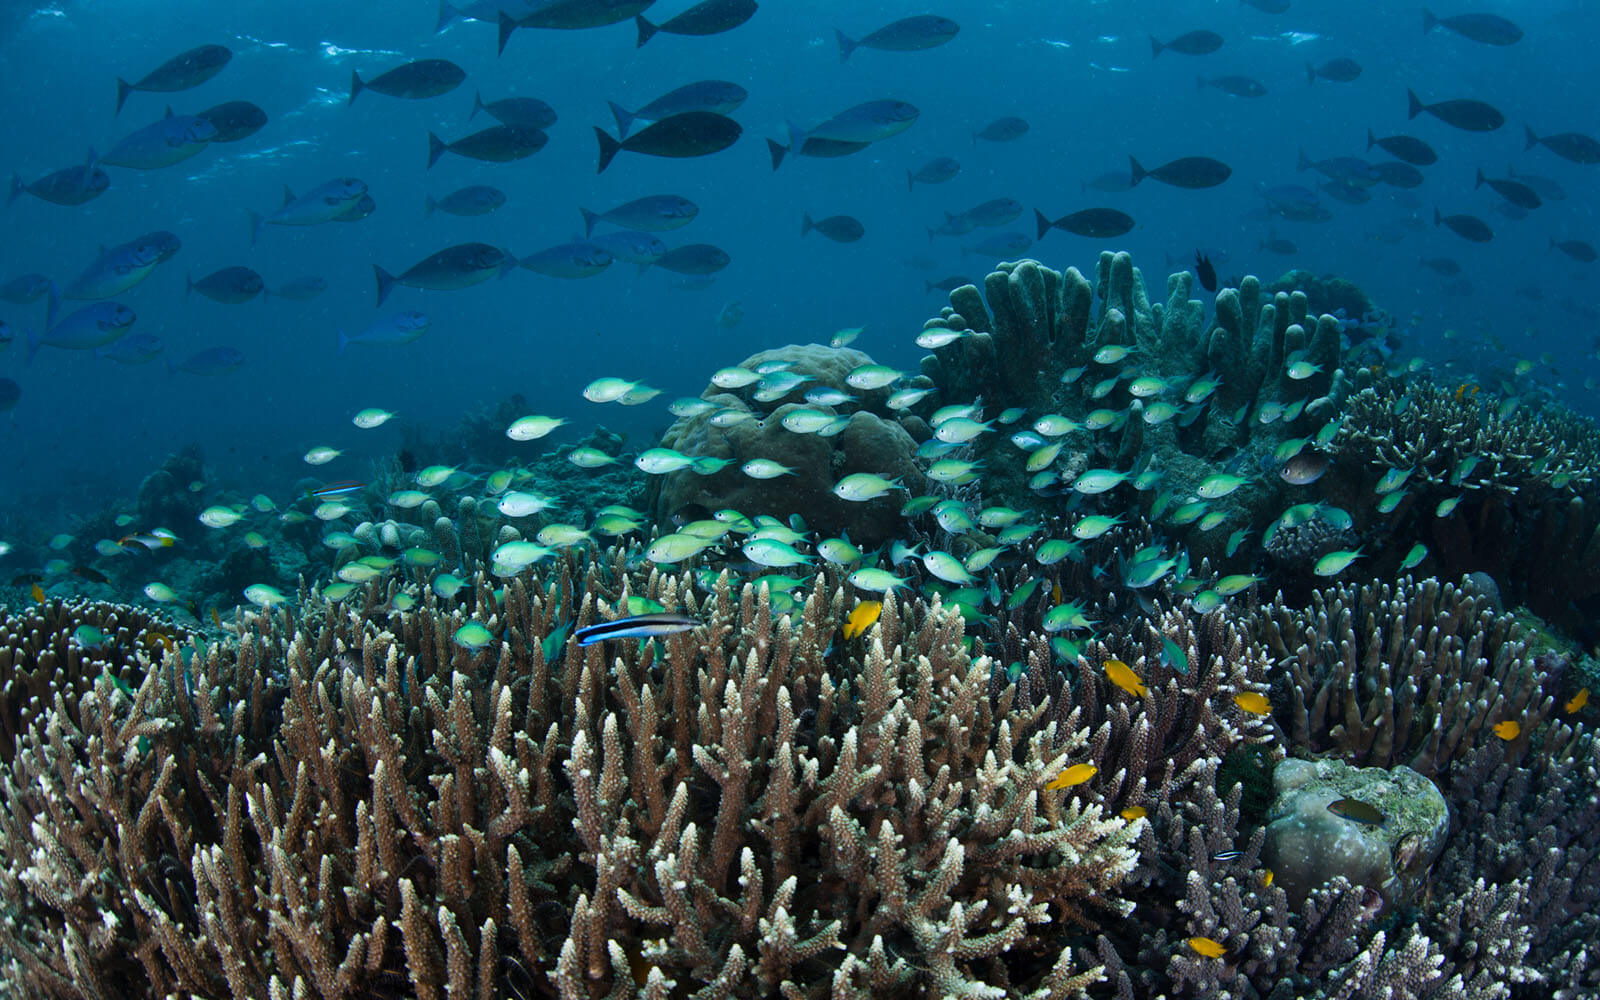 Corals and fish abound in West Papua